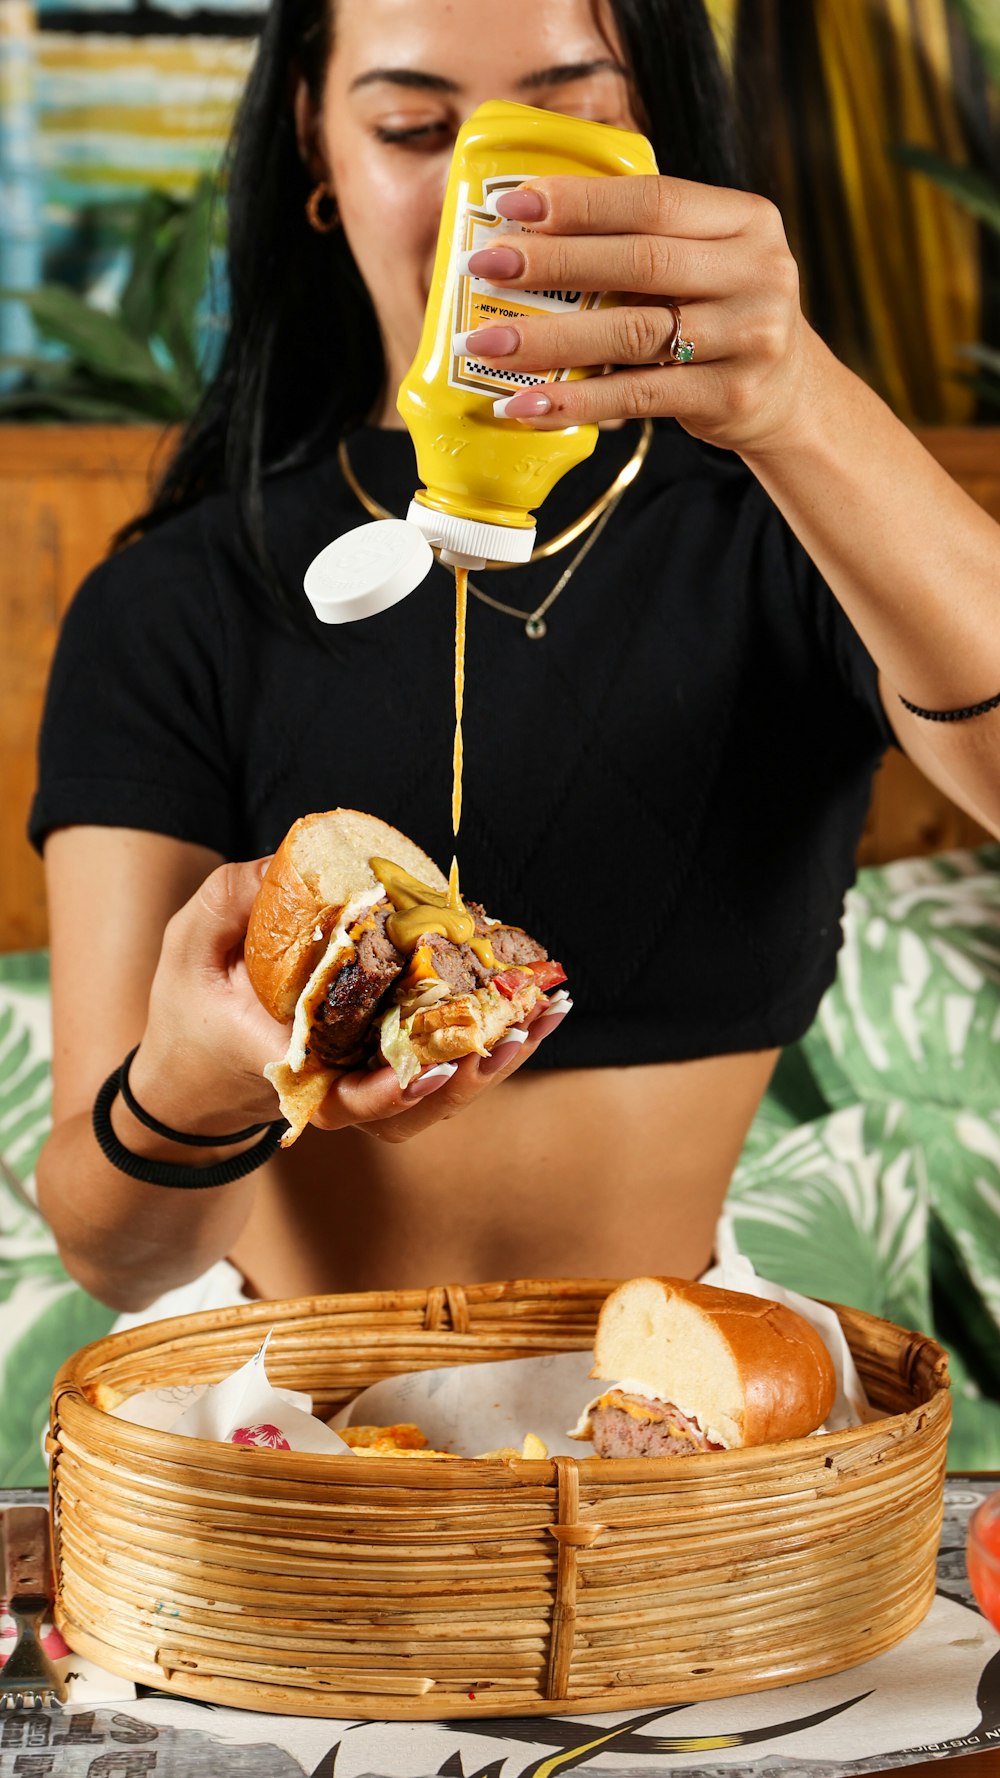 a woman is pouring mustard on a sandwich